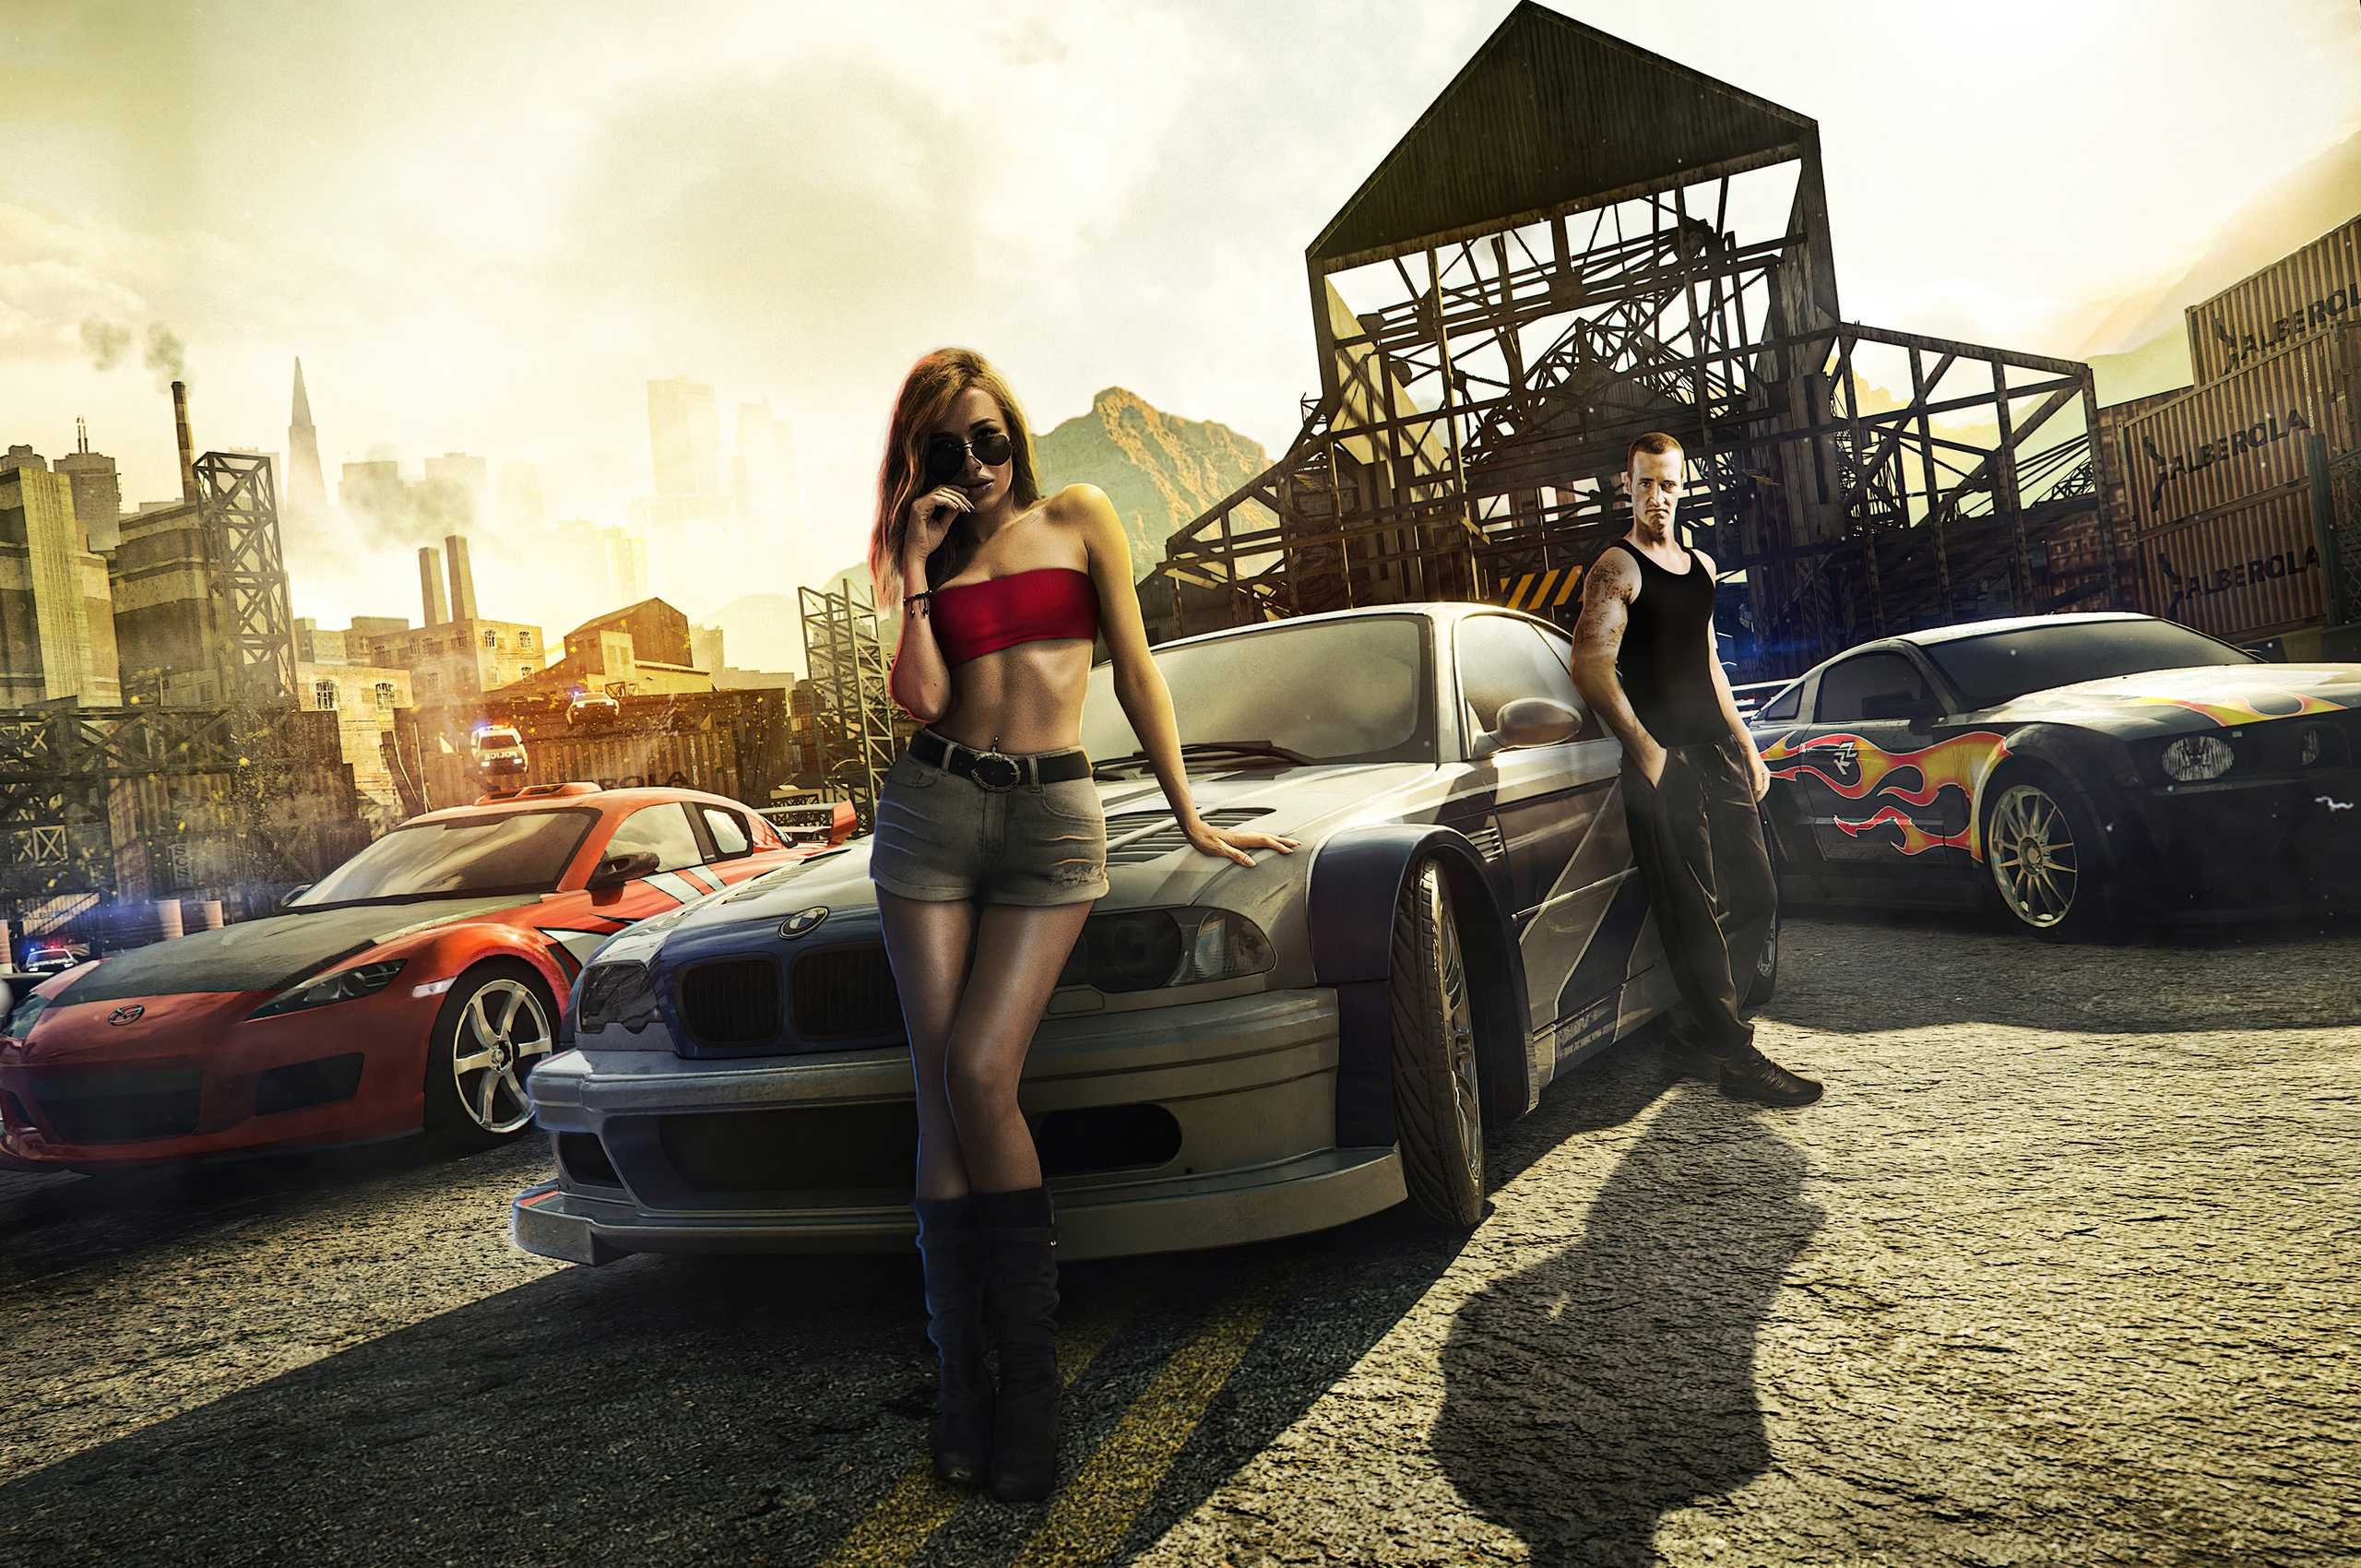 Игра NFS most wanted 2005. Гонки NFS most wanted. Need for Speed most wanted 2005 Миа. NFS most wanted 3.